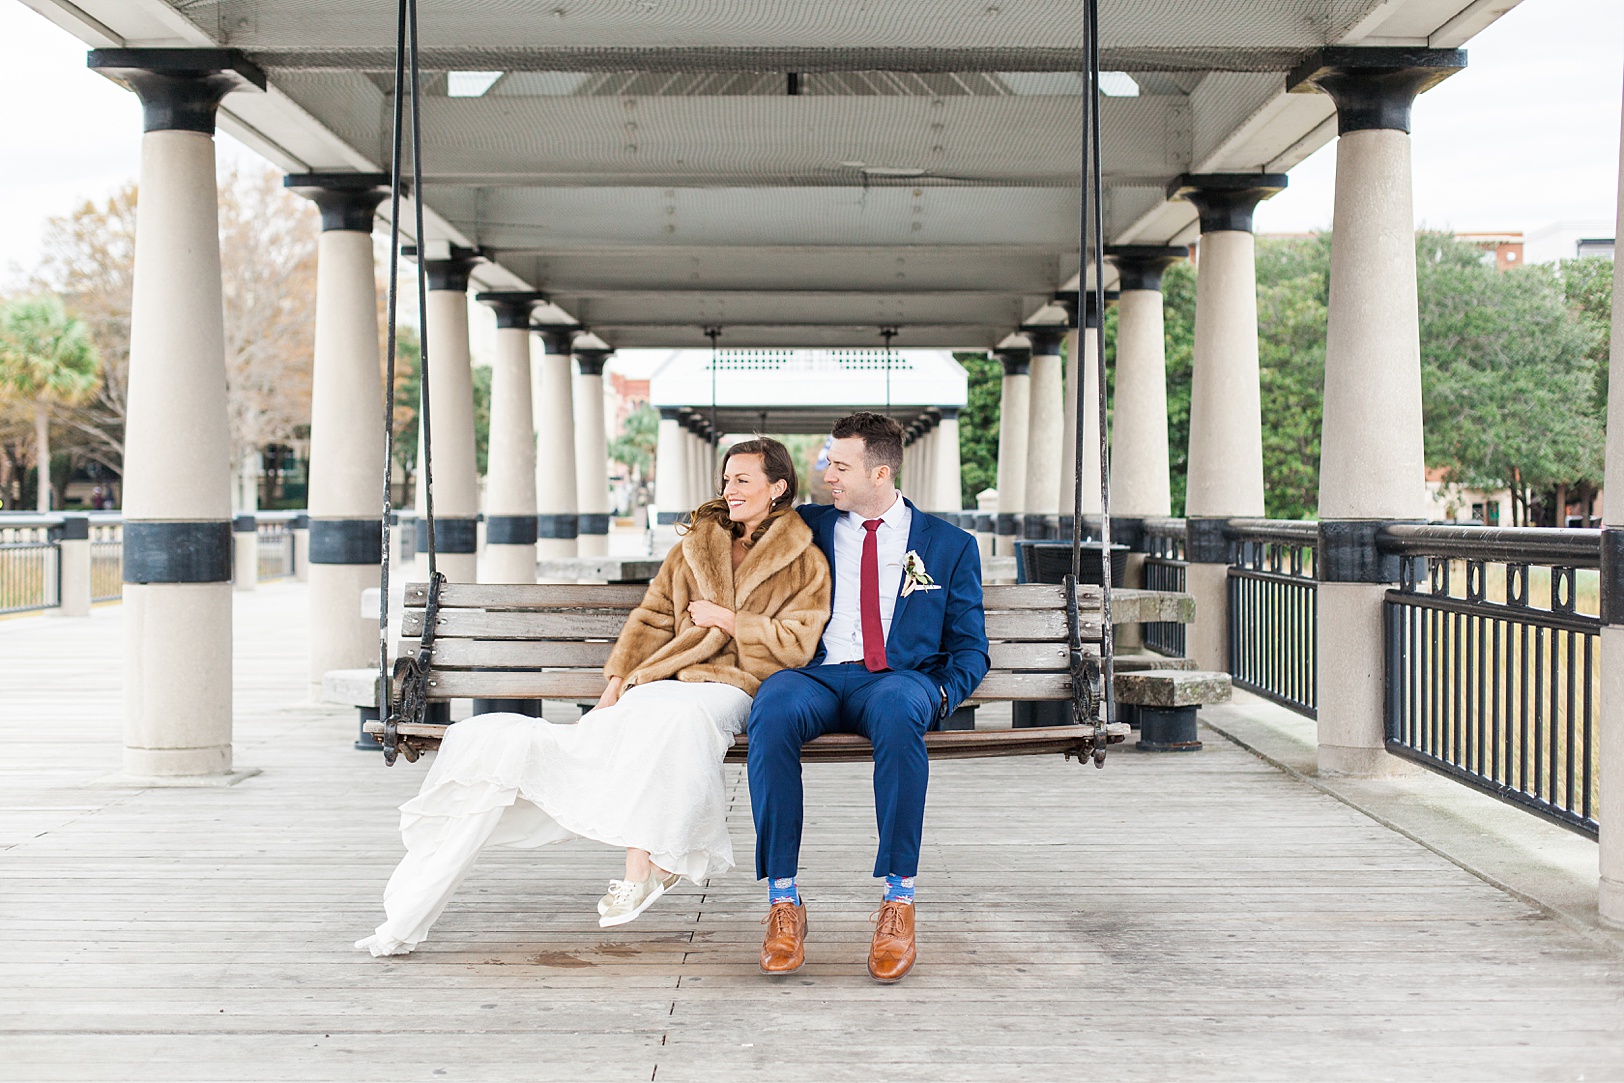 Wedding Portraits at Waterfront Park Swings | Kaitlin Scott Photography